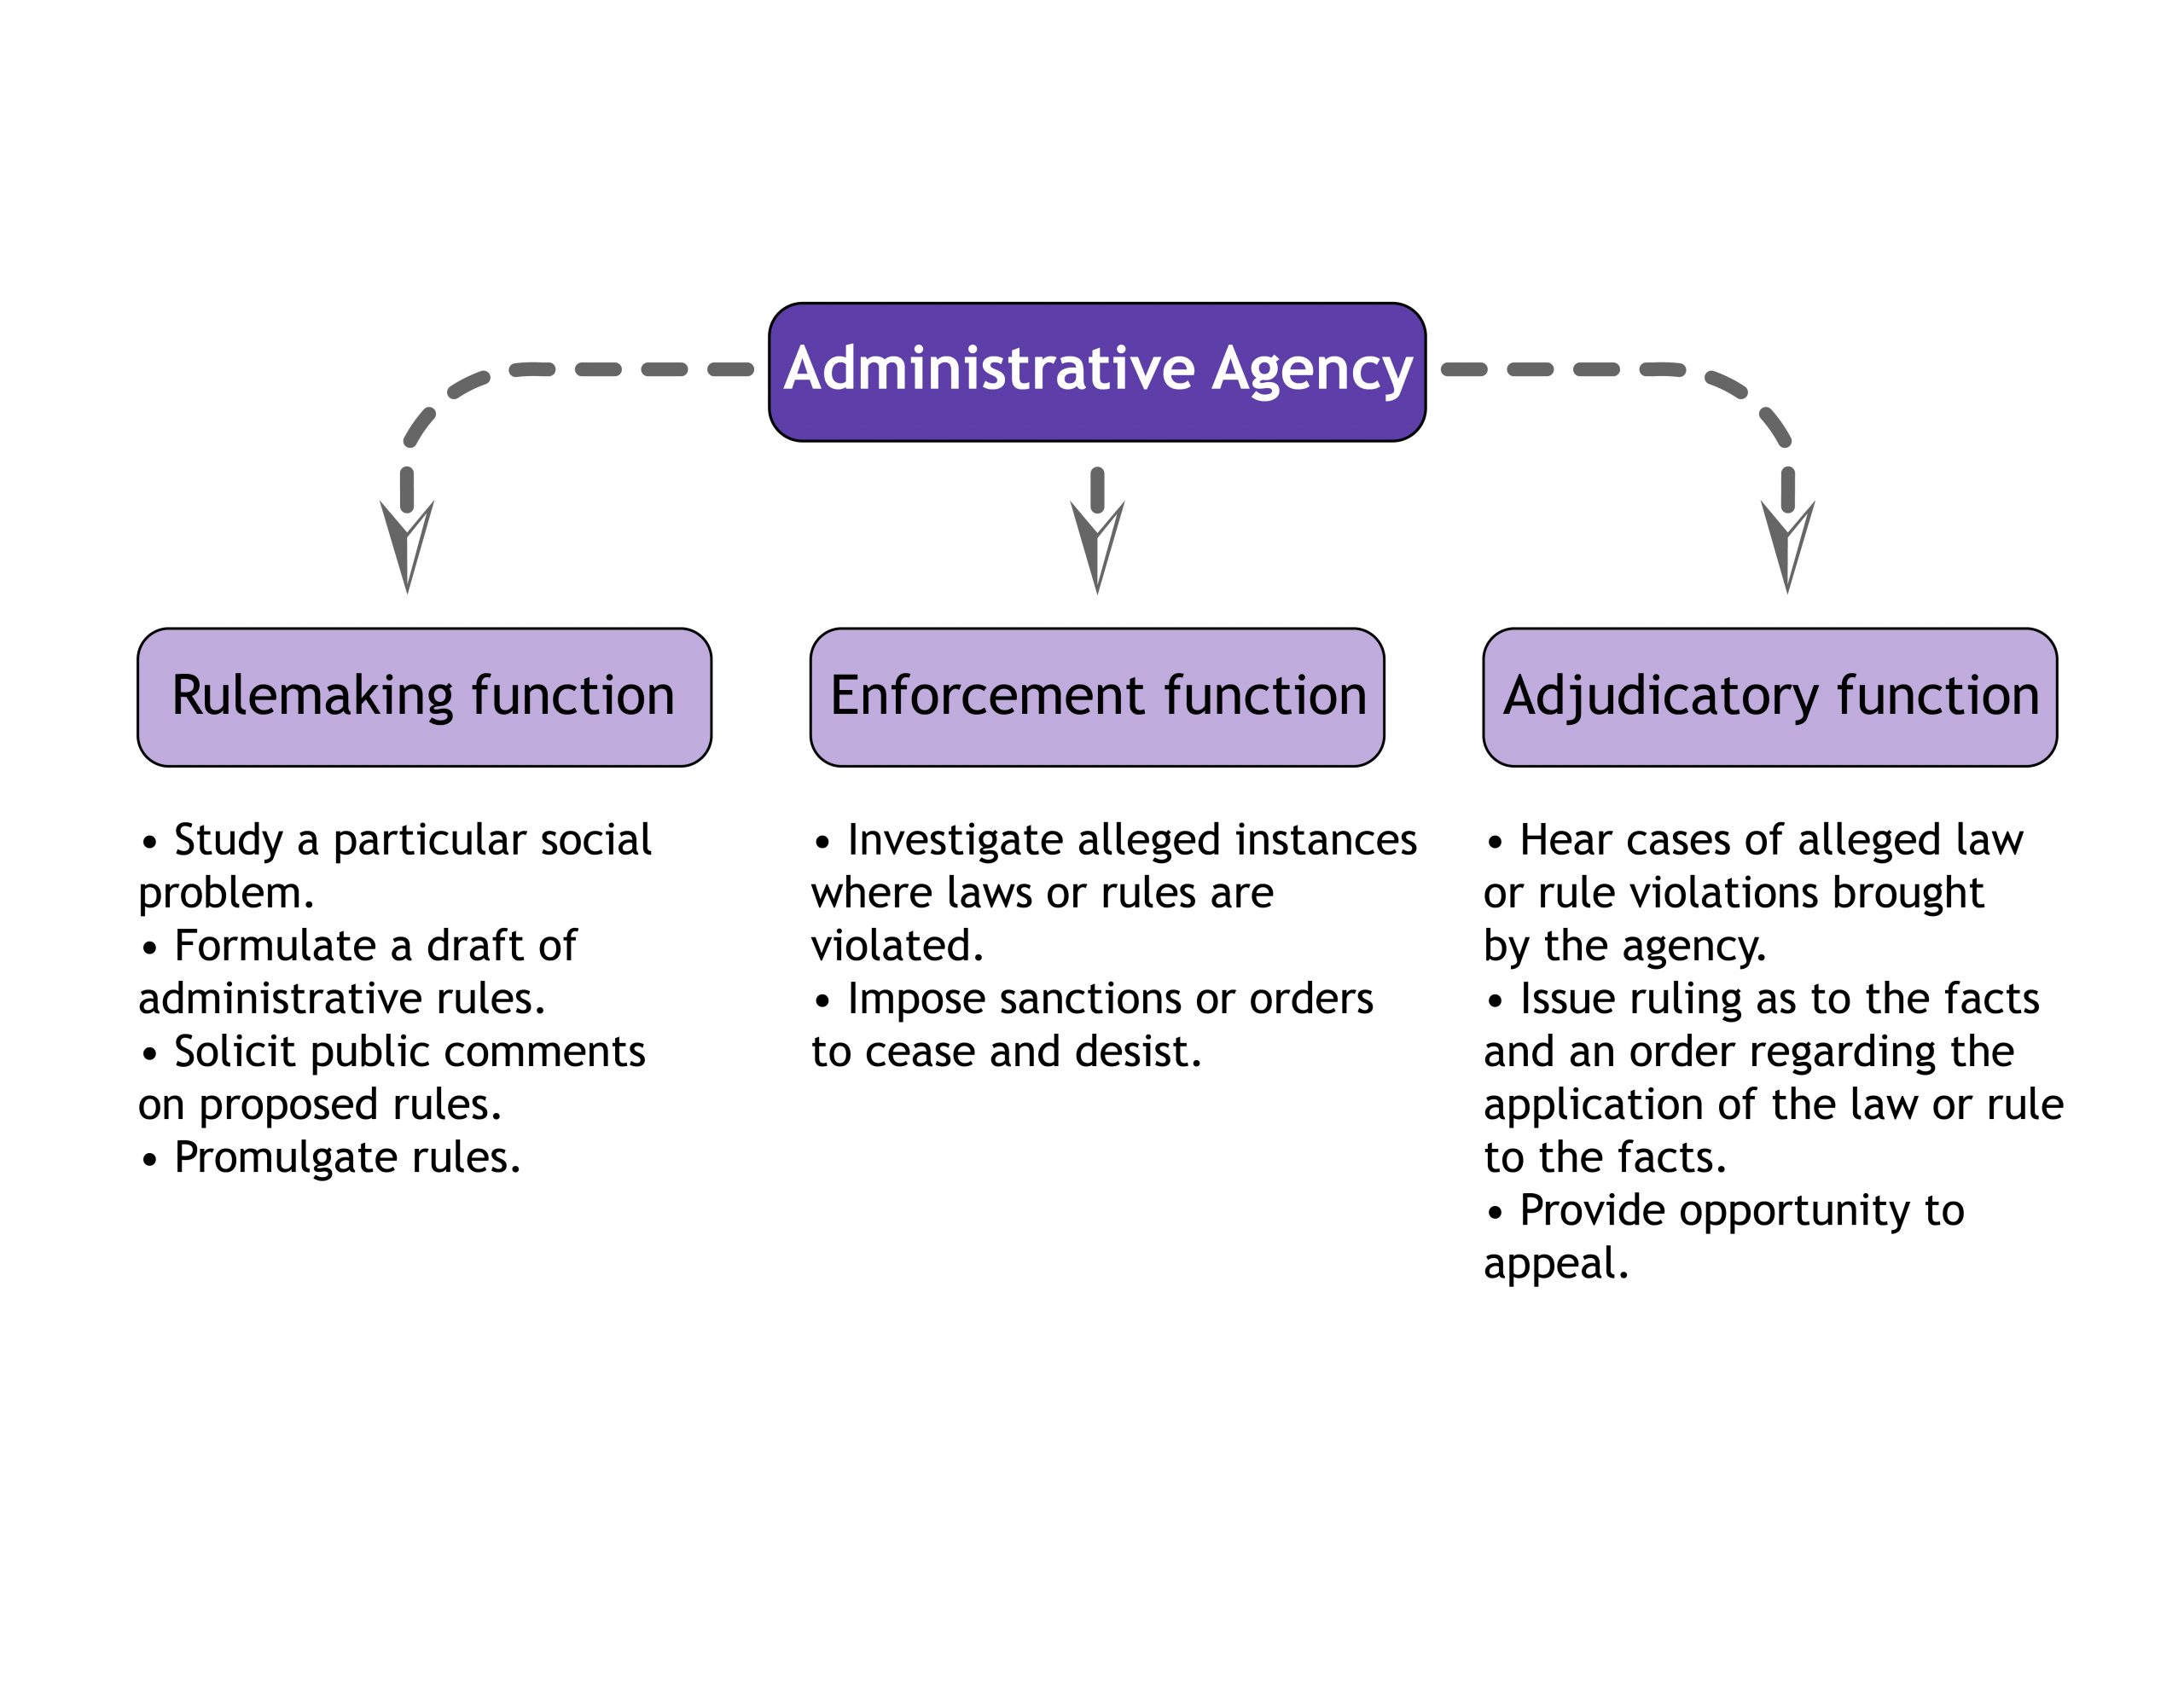 Graph showing rulemaking, enforcement, and adjudicatory functions of administrative agencies